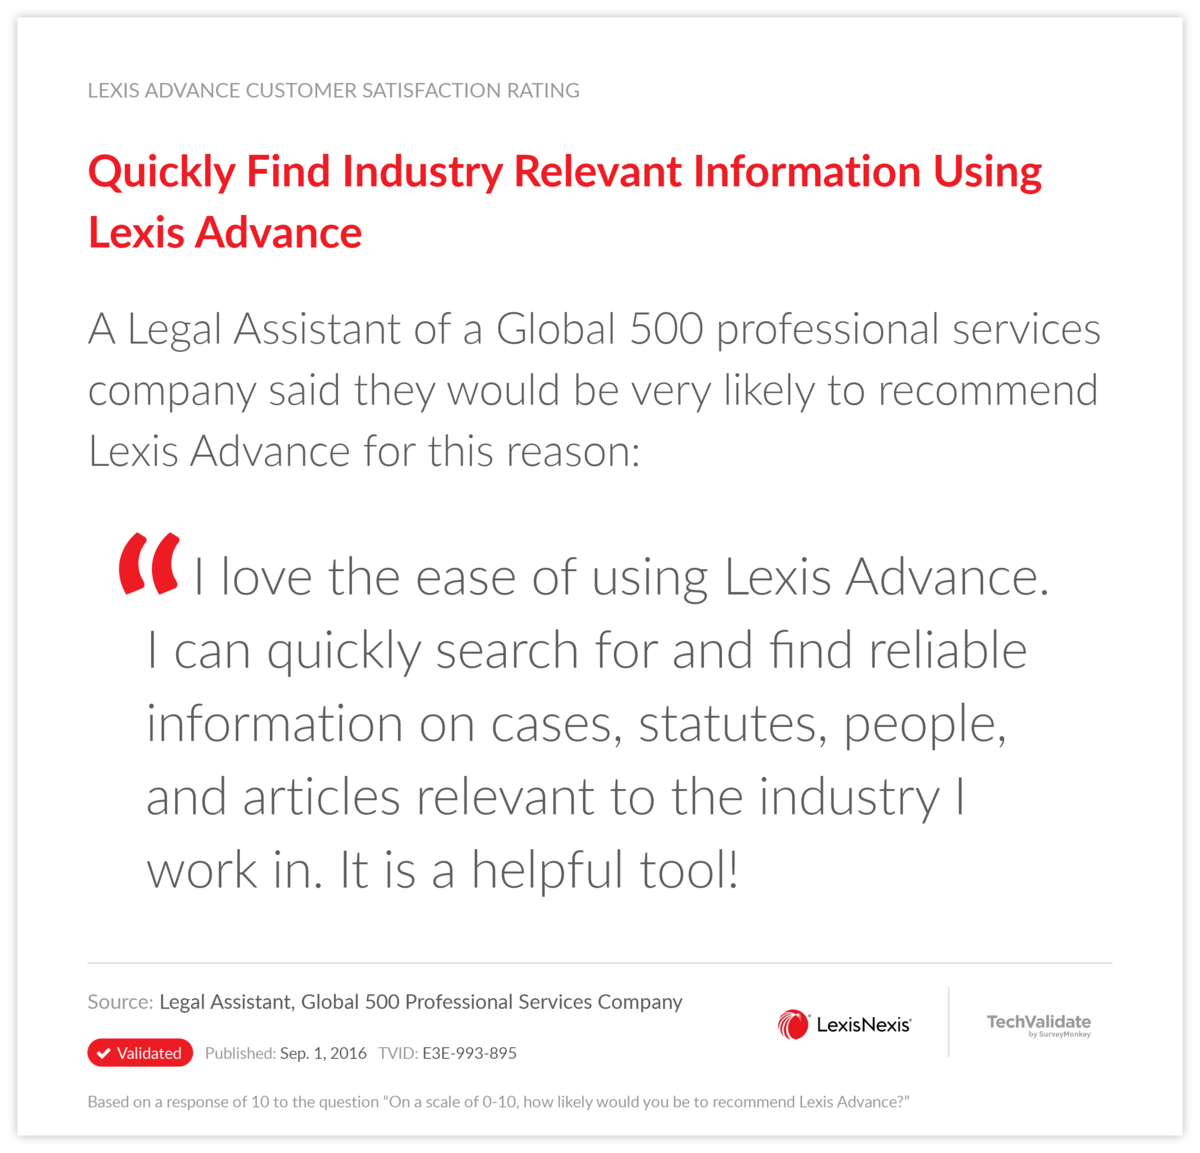 Quickly Find Industry Relevant Information Using Lexis Advance